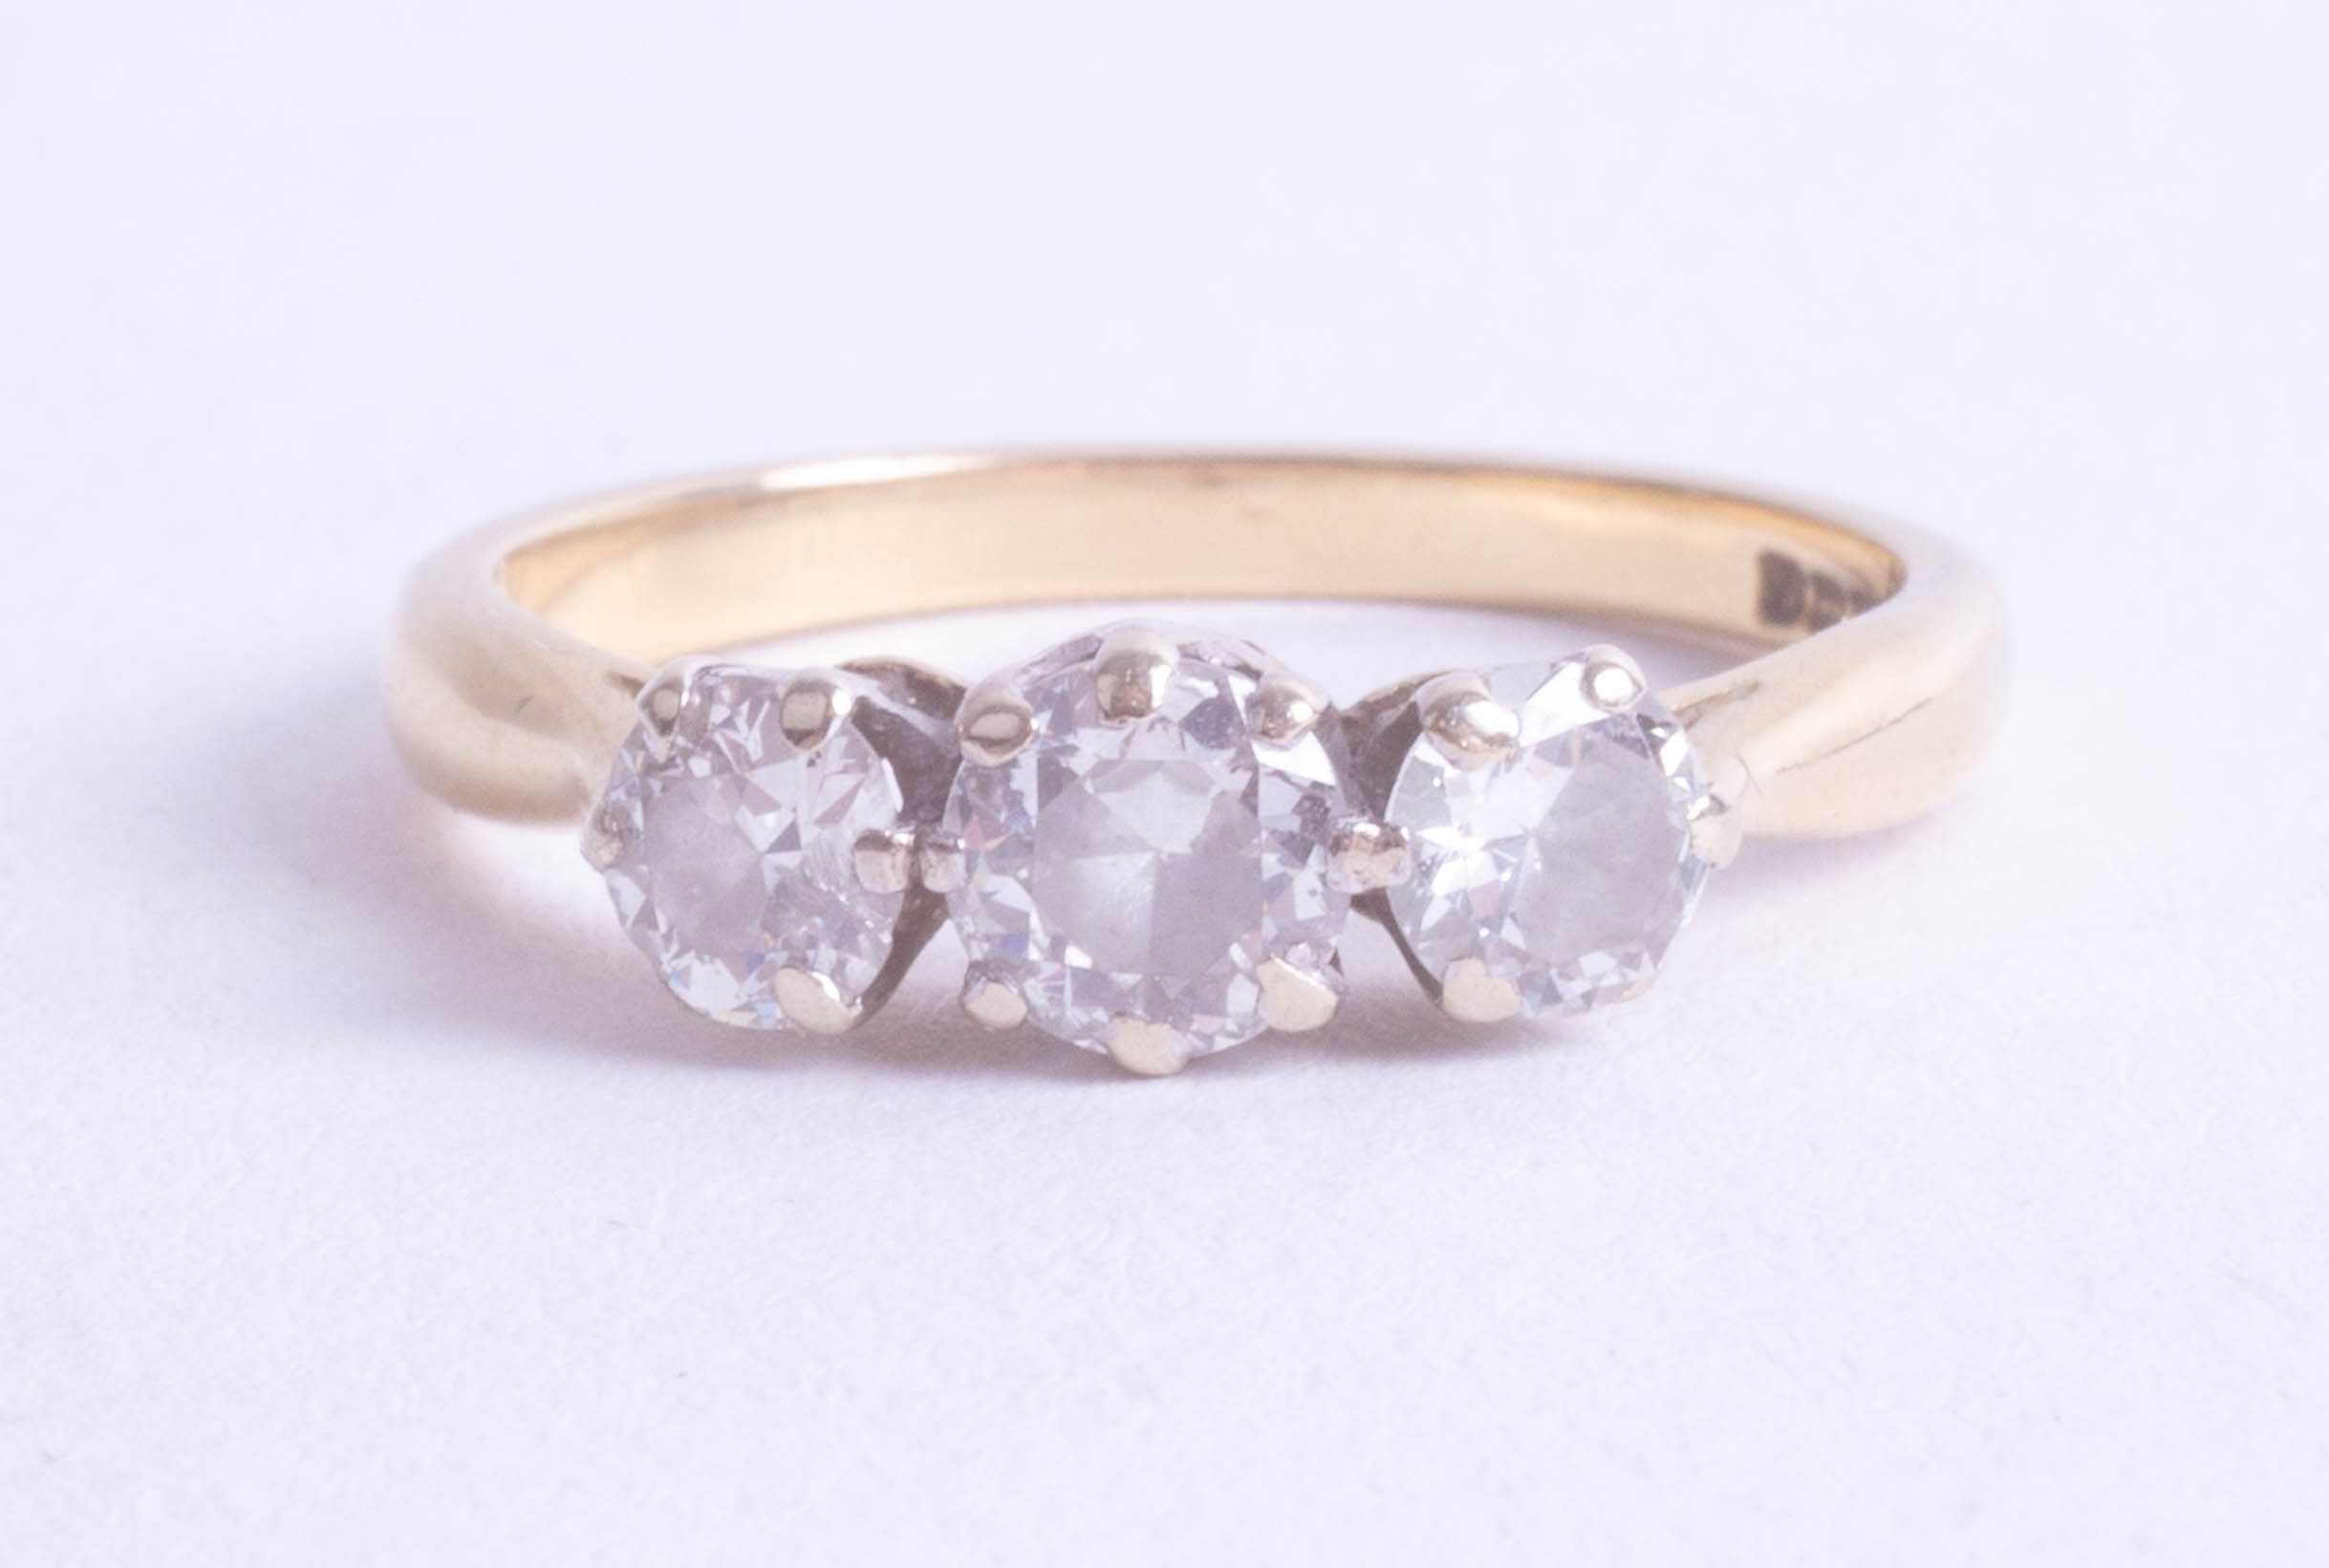 An 18ct three stone ring, the centre stone approximately 0.4 to 0.5 carats, size P, being sold to - Image 2 of 2